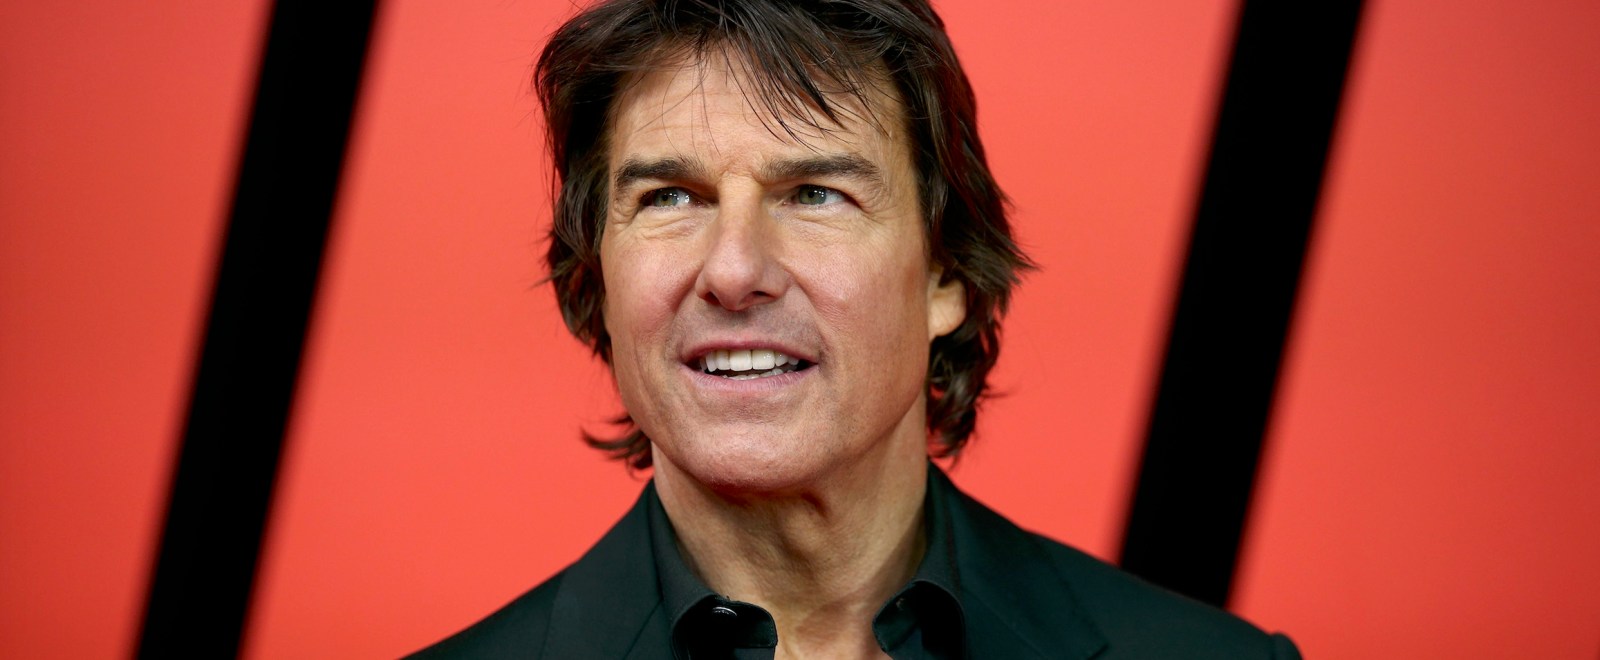 Tom Cruise Stole The Show At Victoria Beckham’s Birthday Party When He Reportedly Started Breakdancing